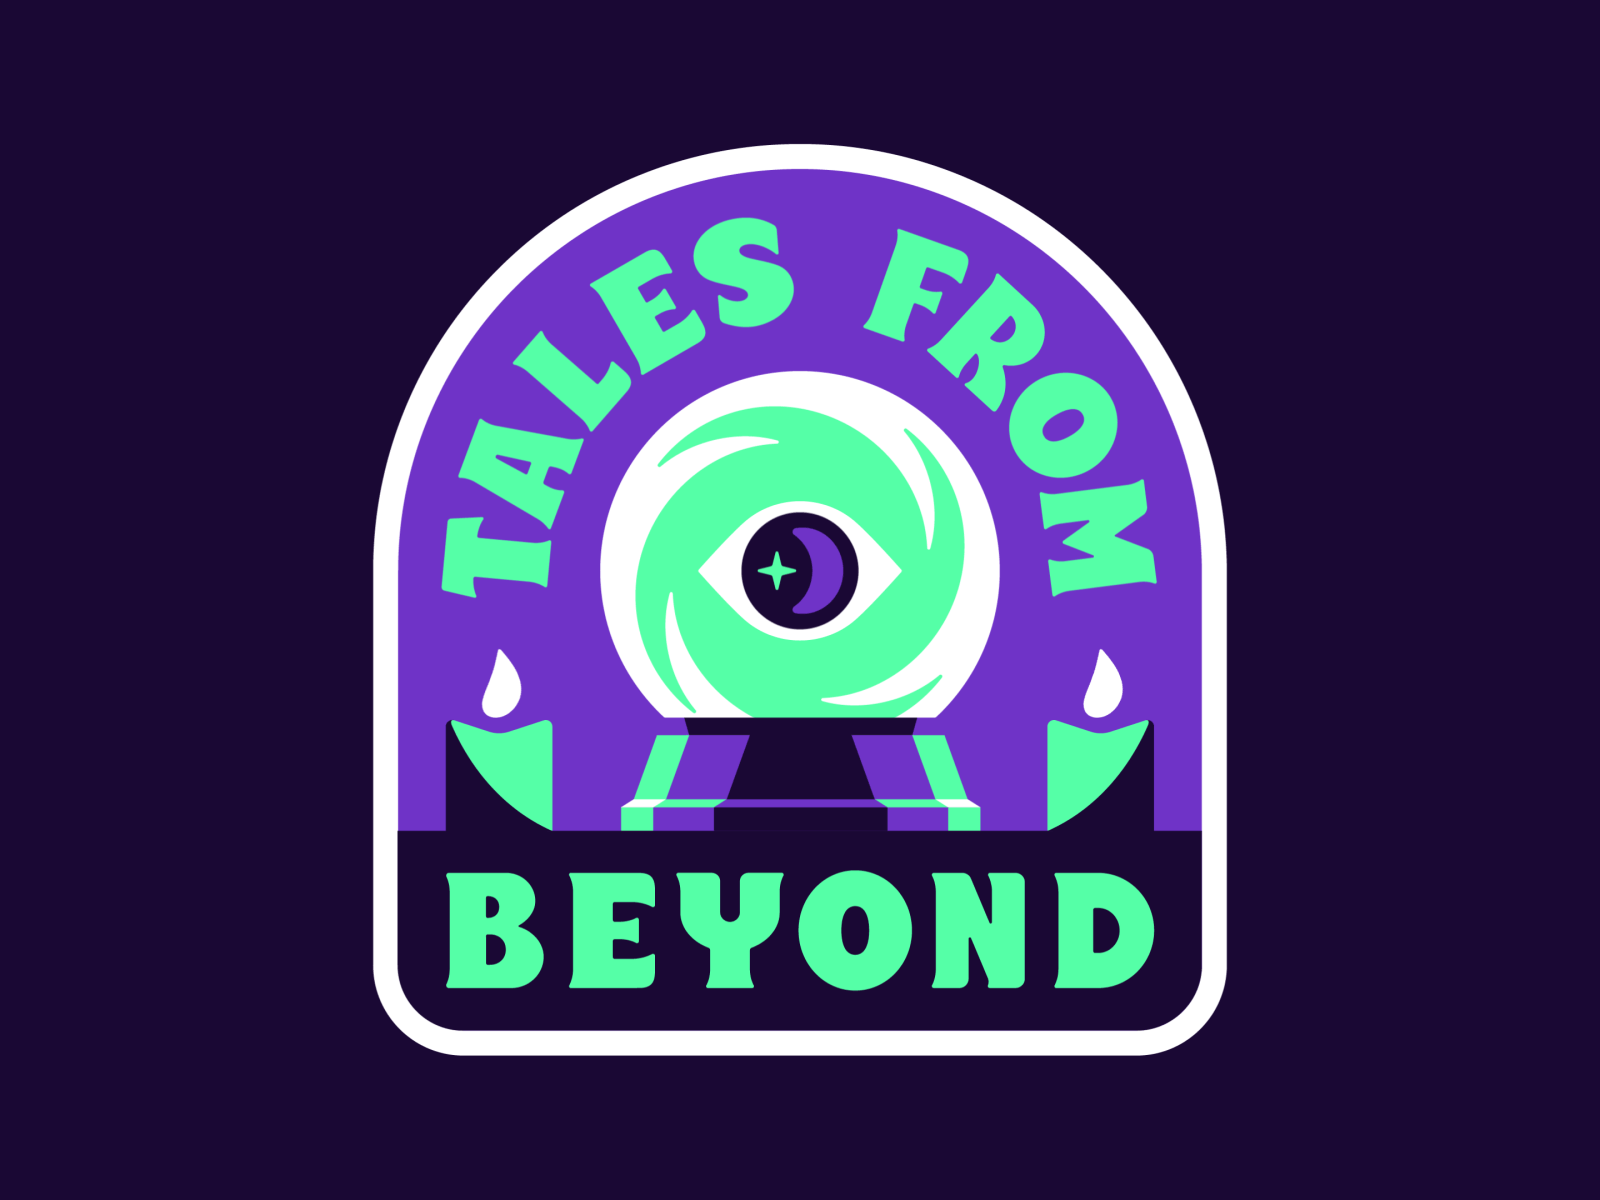 TALES FROM BEYOND 👁🔮 Animated Badge Design